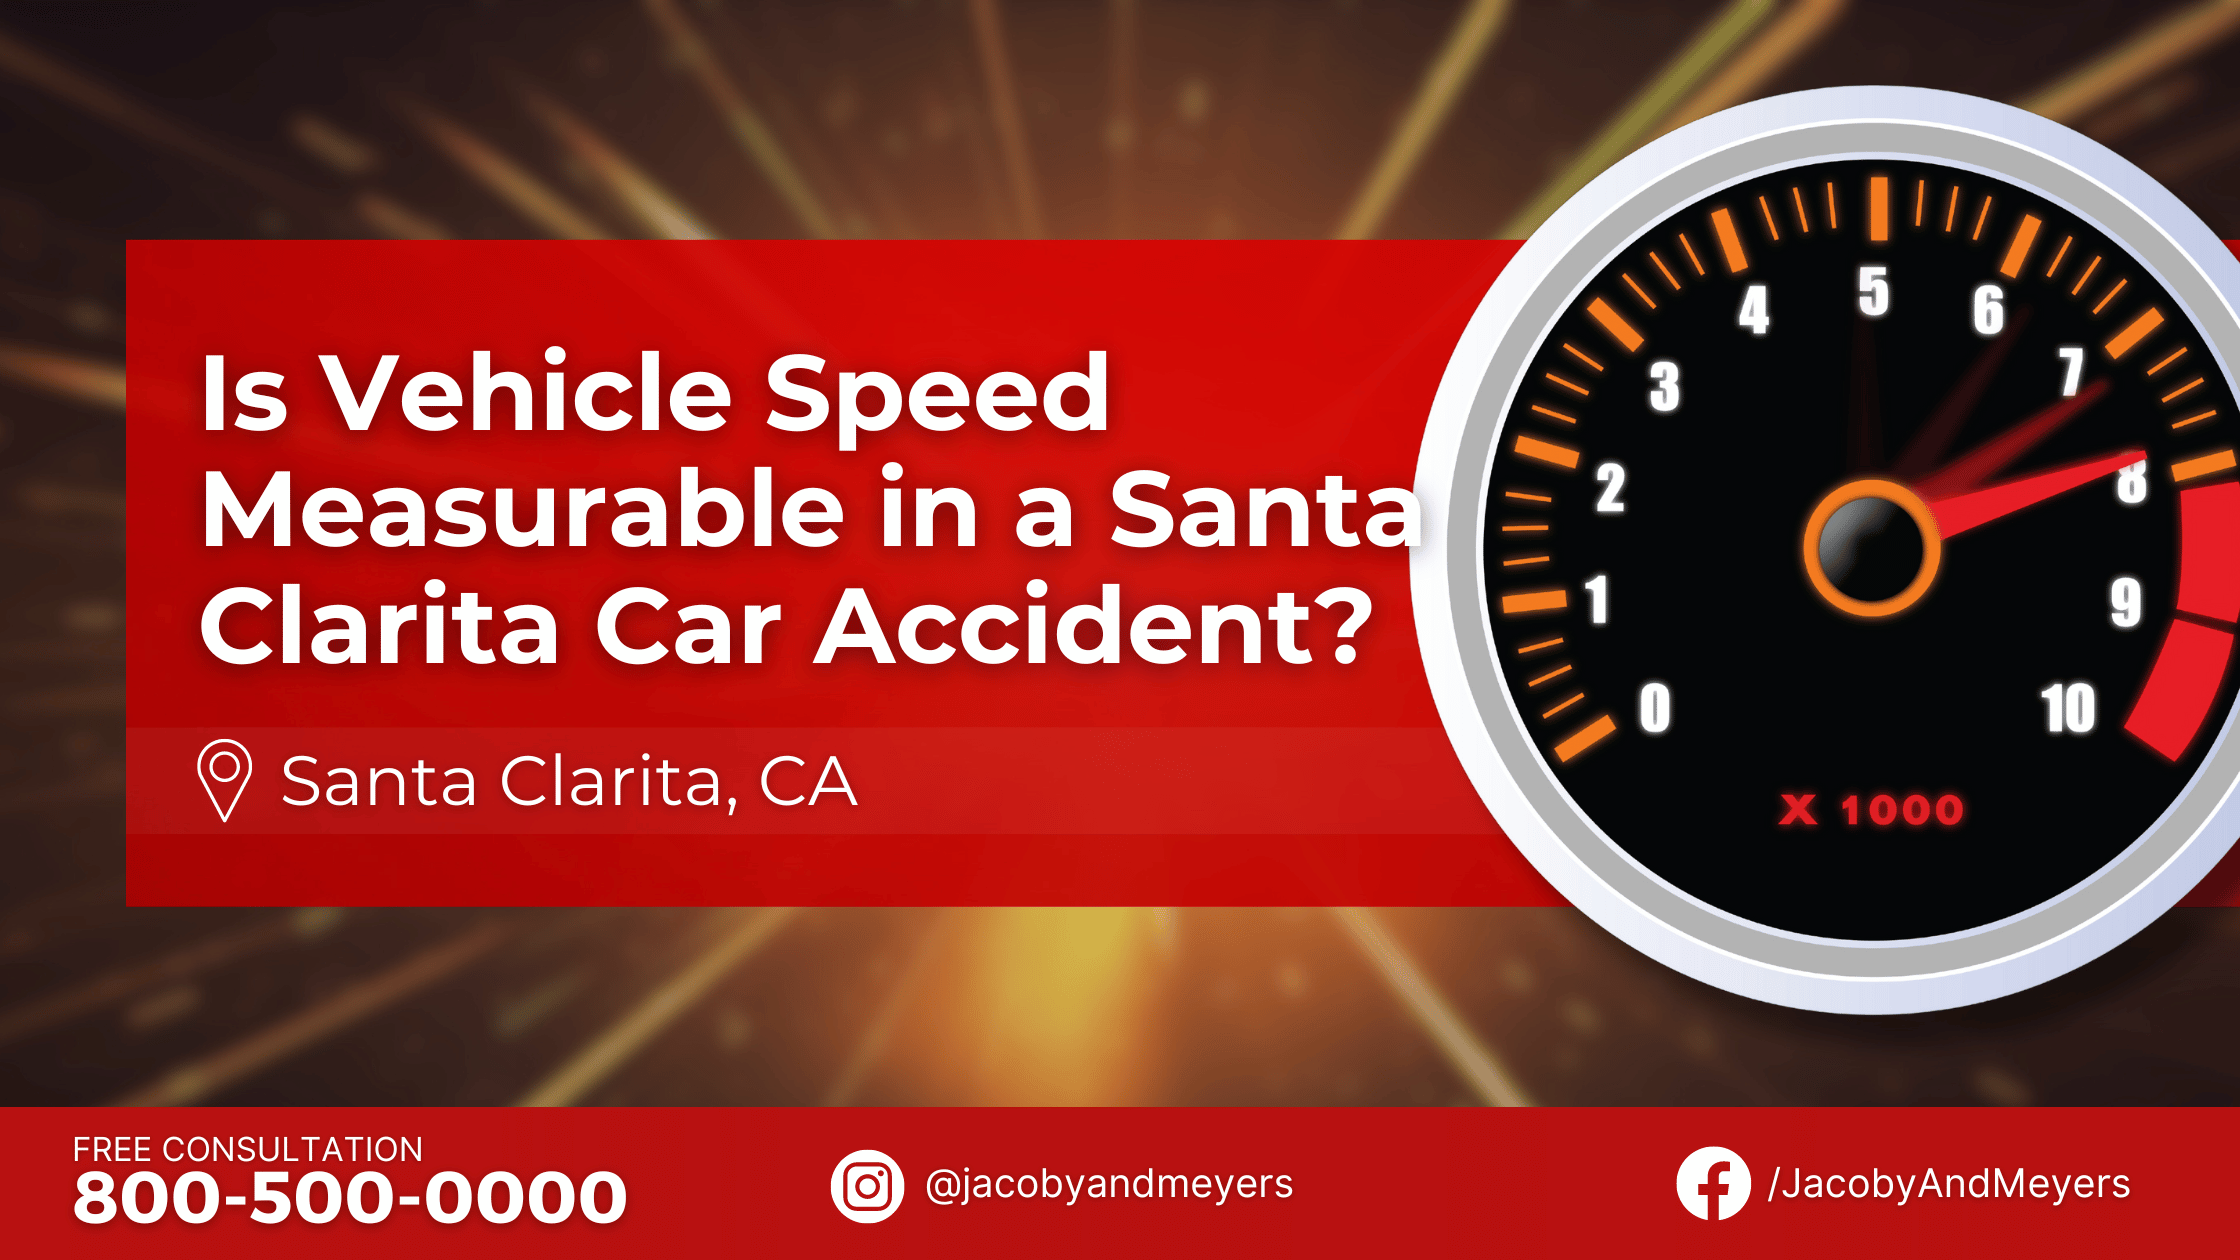 Is Vehicle Speed Measurable in a Santa Clarita Car Accident?